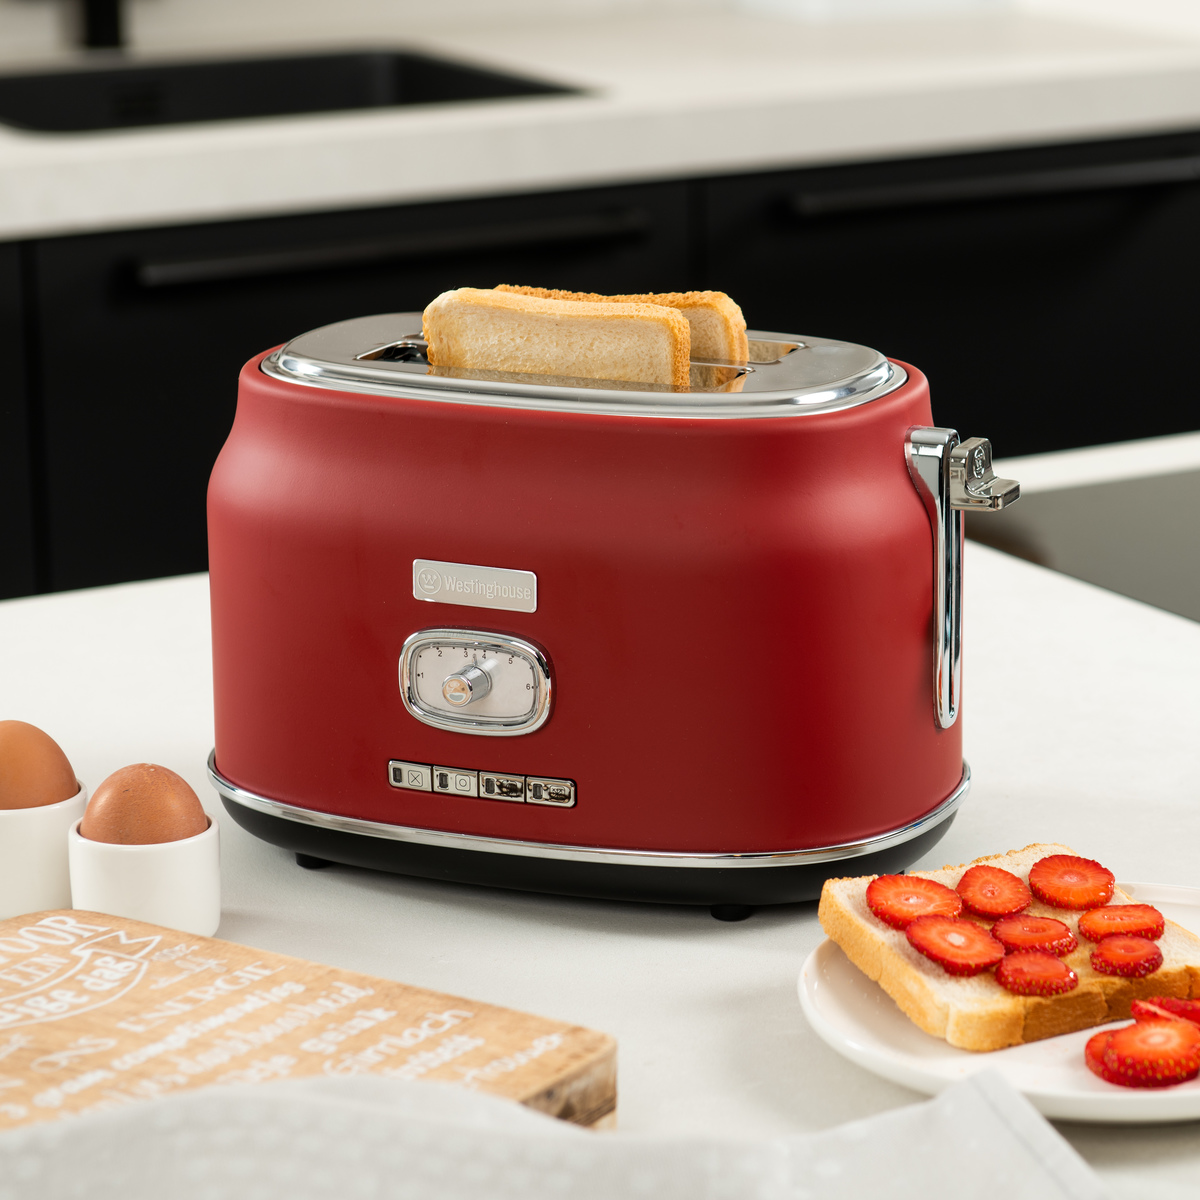 Introducing Westinghouse retro toaster! 🍞✨ Elevate your breakfast game with this elegant toaster featuring 6 browning levels, an auto-centering mechanism, and a convenient warming rack to keep your toast warm. 

#retrotoaster #breakfastessentials #kitchenappliances